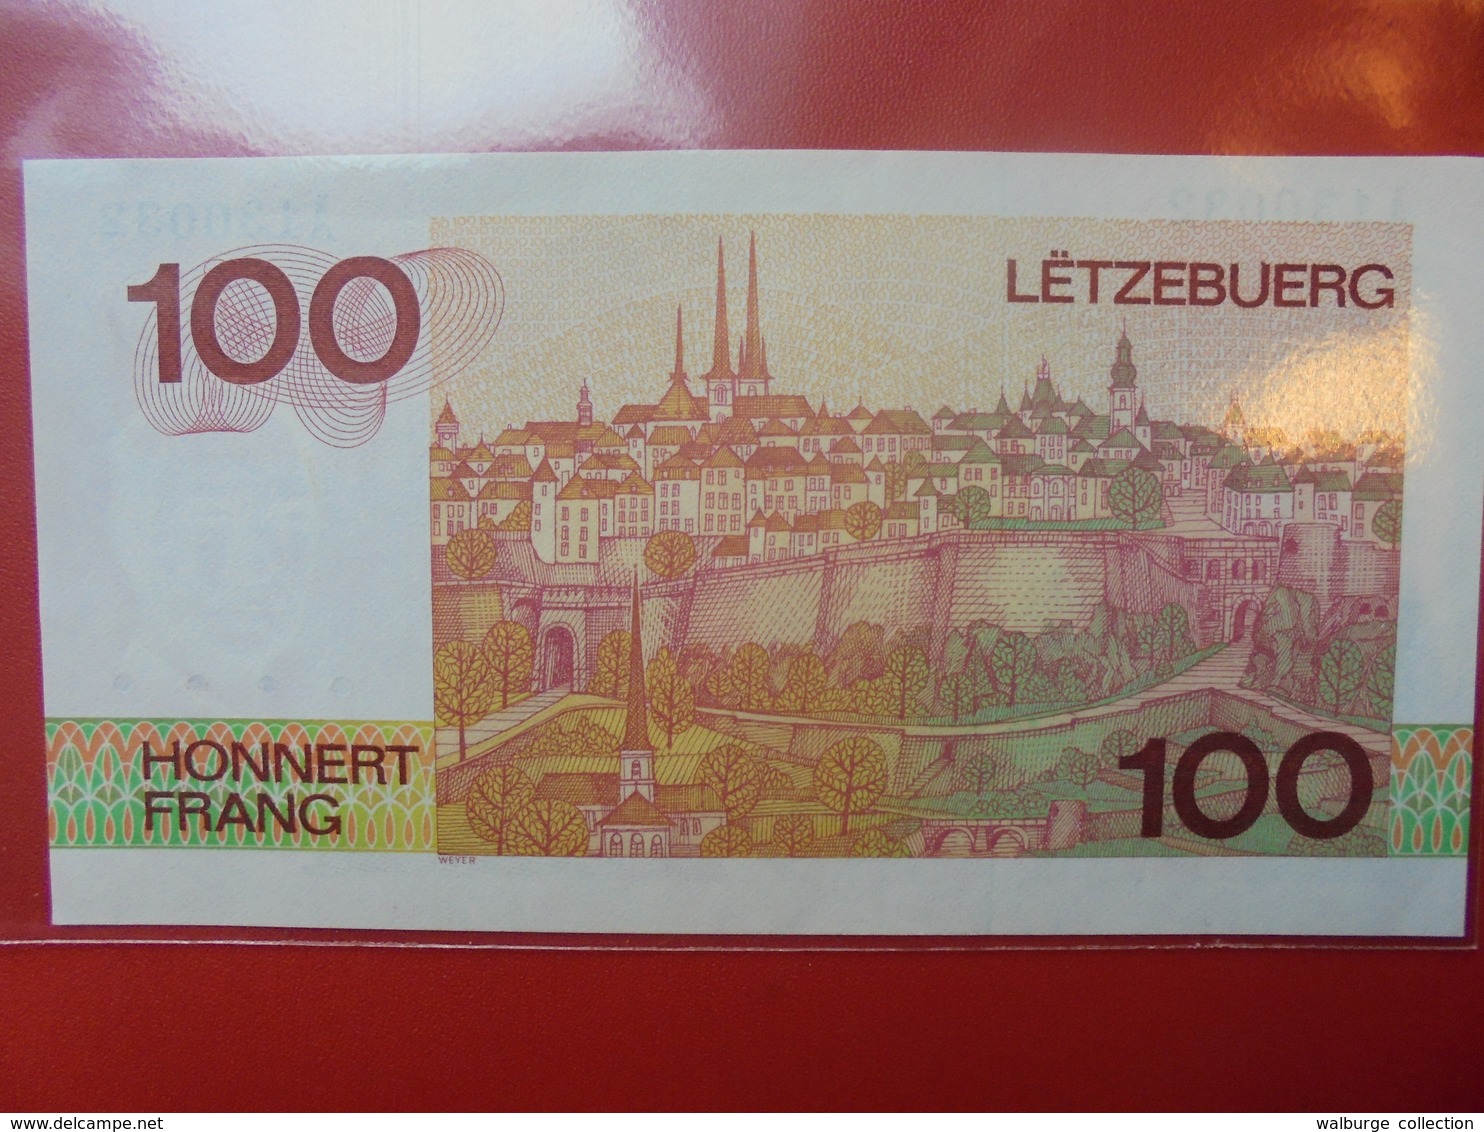 LUXEMBOURG 100 FRANCS 1980-86 CIRCULER BELLE QUALITE - Luxembourg